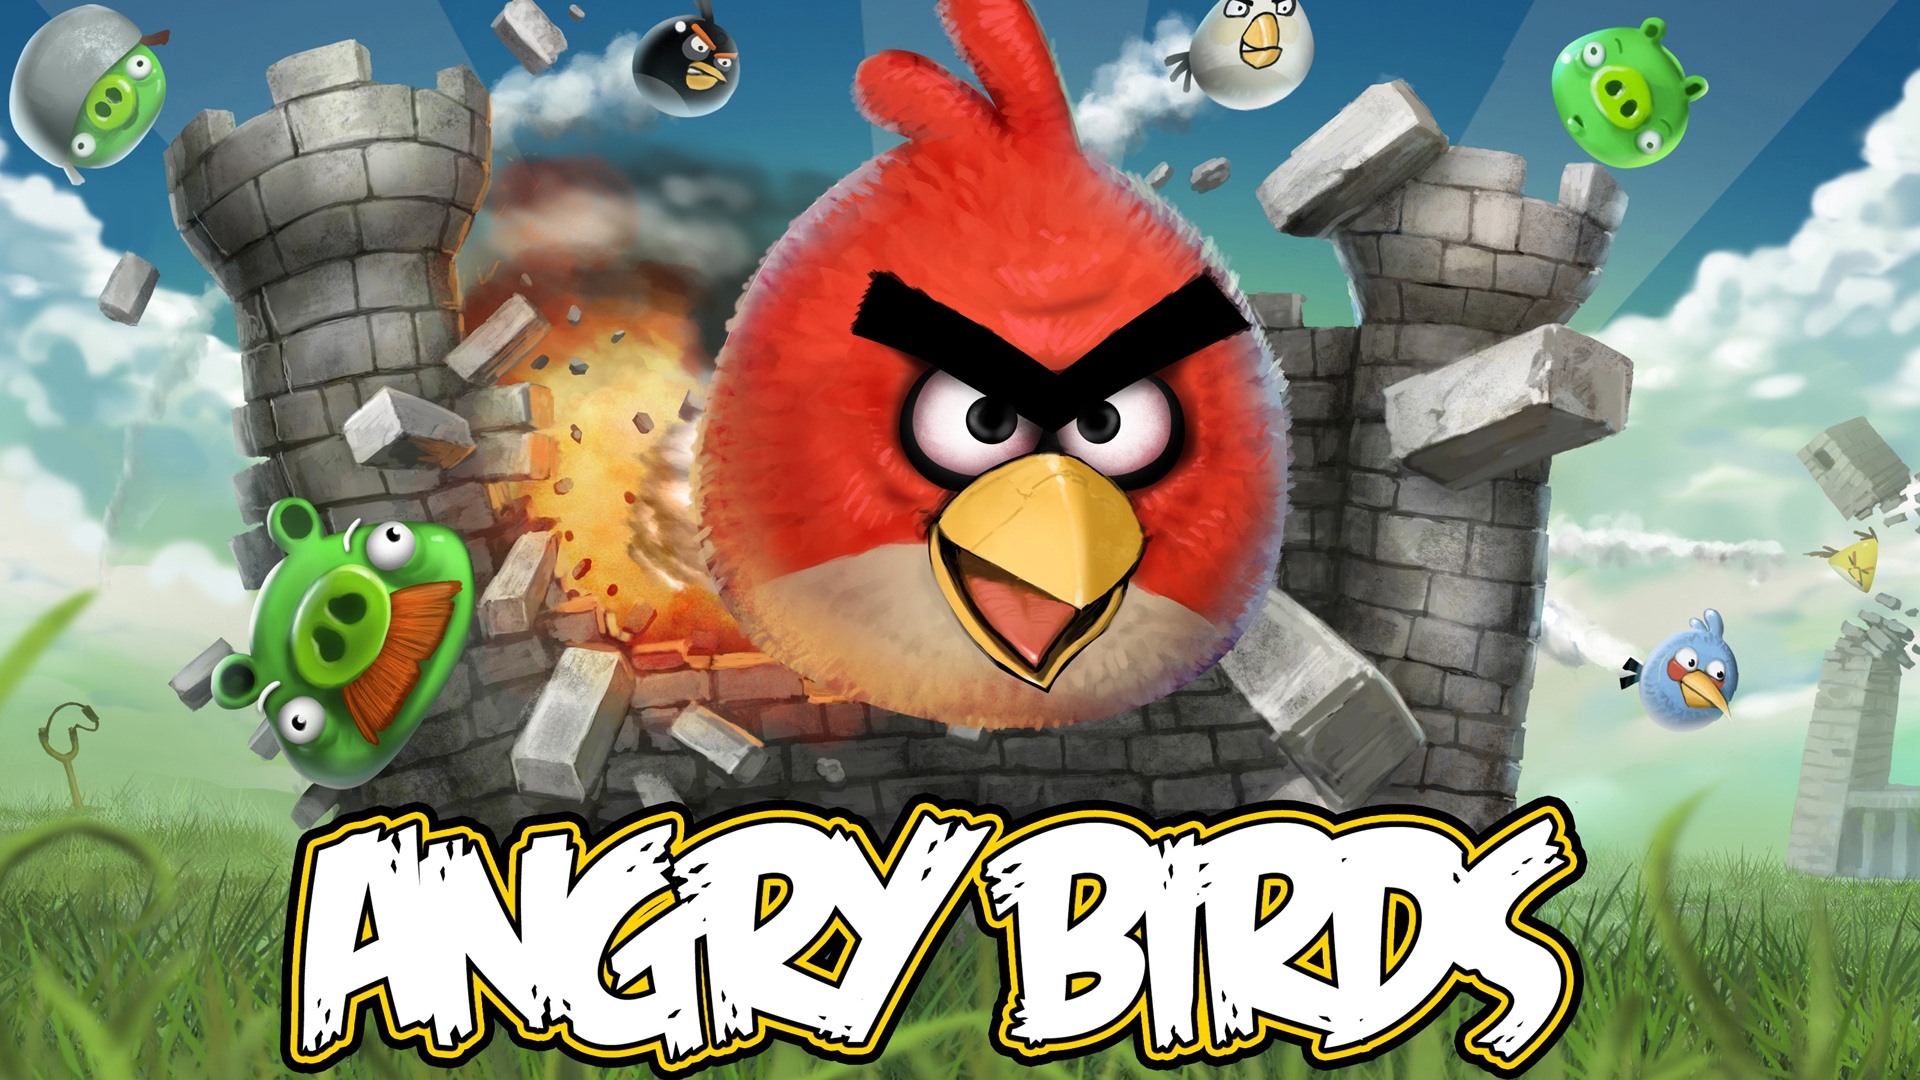 Angry Birds Spiel wallpapers #15 - 1920x1080